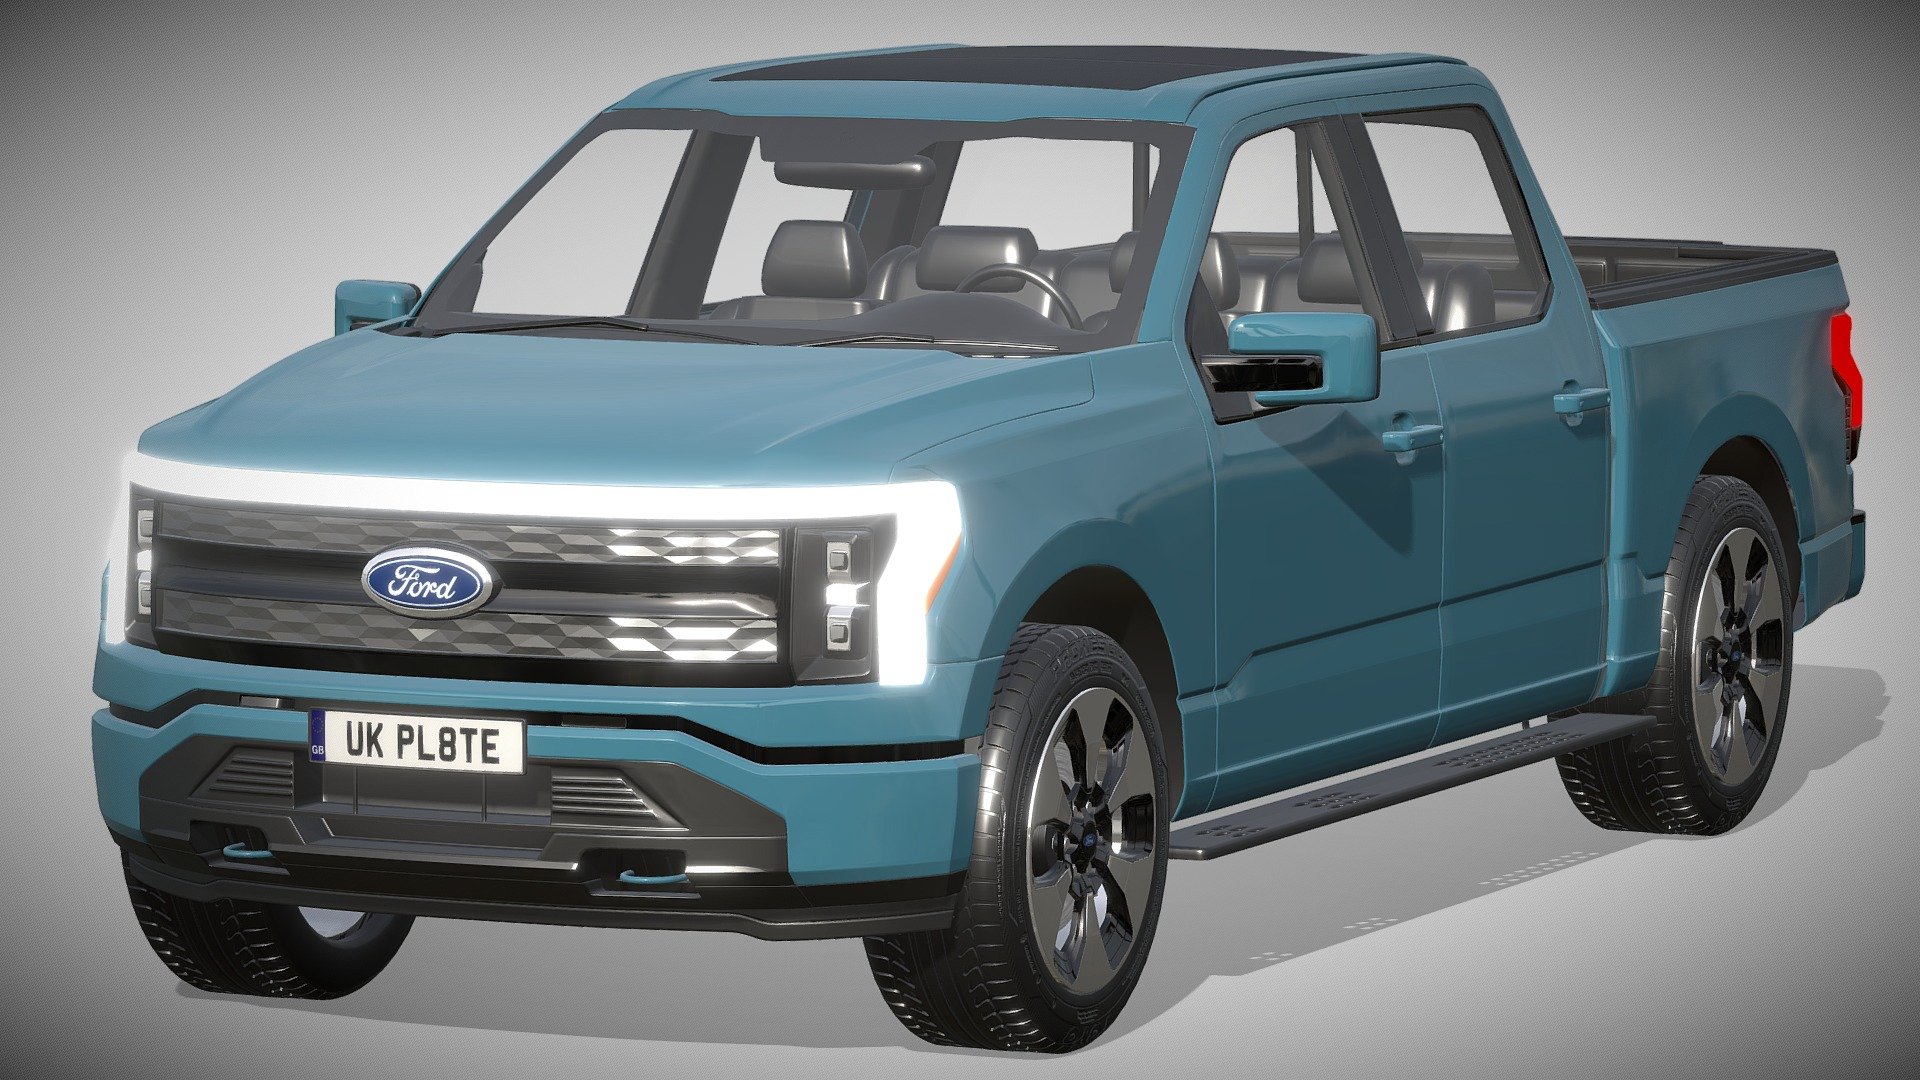 Ford F-150 Lightning 2022

https://www.ford.com/trucks/f150/f150-lightning/2022/

Clean geometry Light weight model, yet completely detailed for HI-Res renders. Use for movies, Advertisements or games

Corona render and materials

All textures include in *.rar files

Lighting setup is not included in the file! - Ford F-150 Lightning 2022 - Buy Royalty Free 3D model by zifir3d 3d model